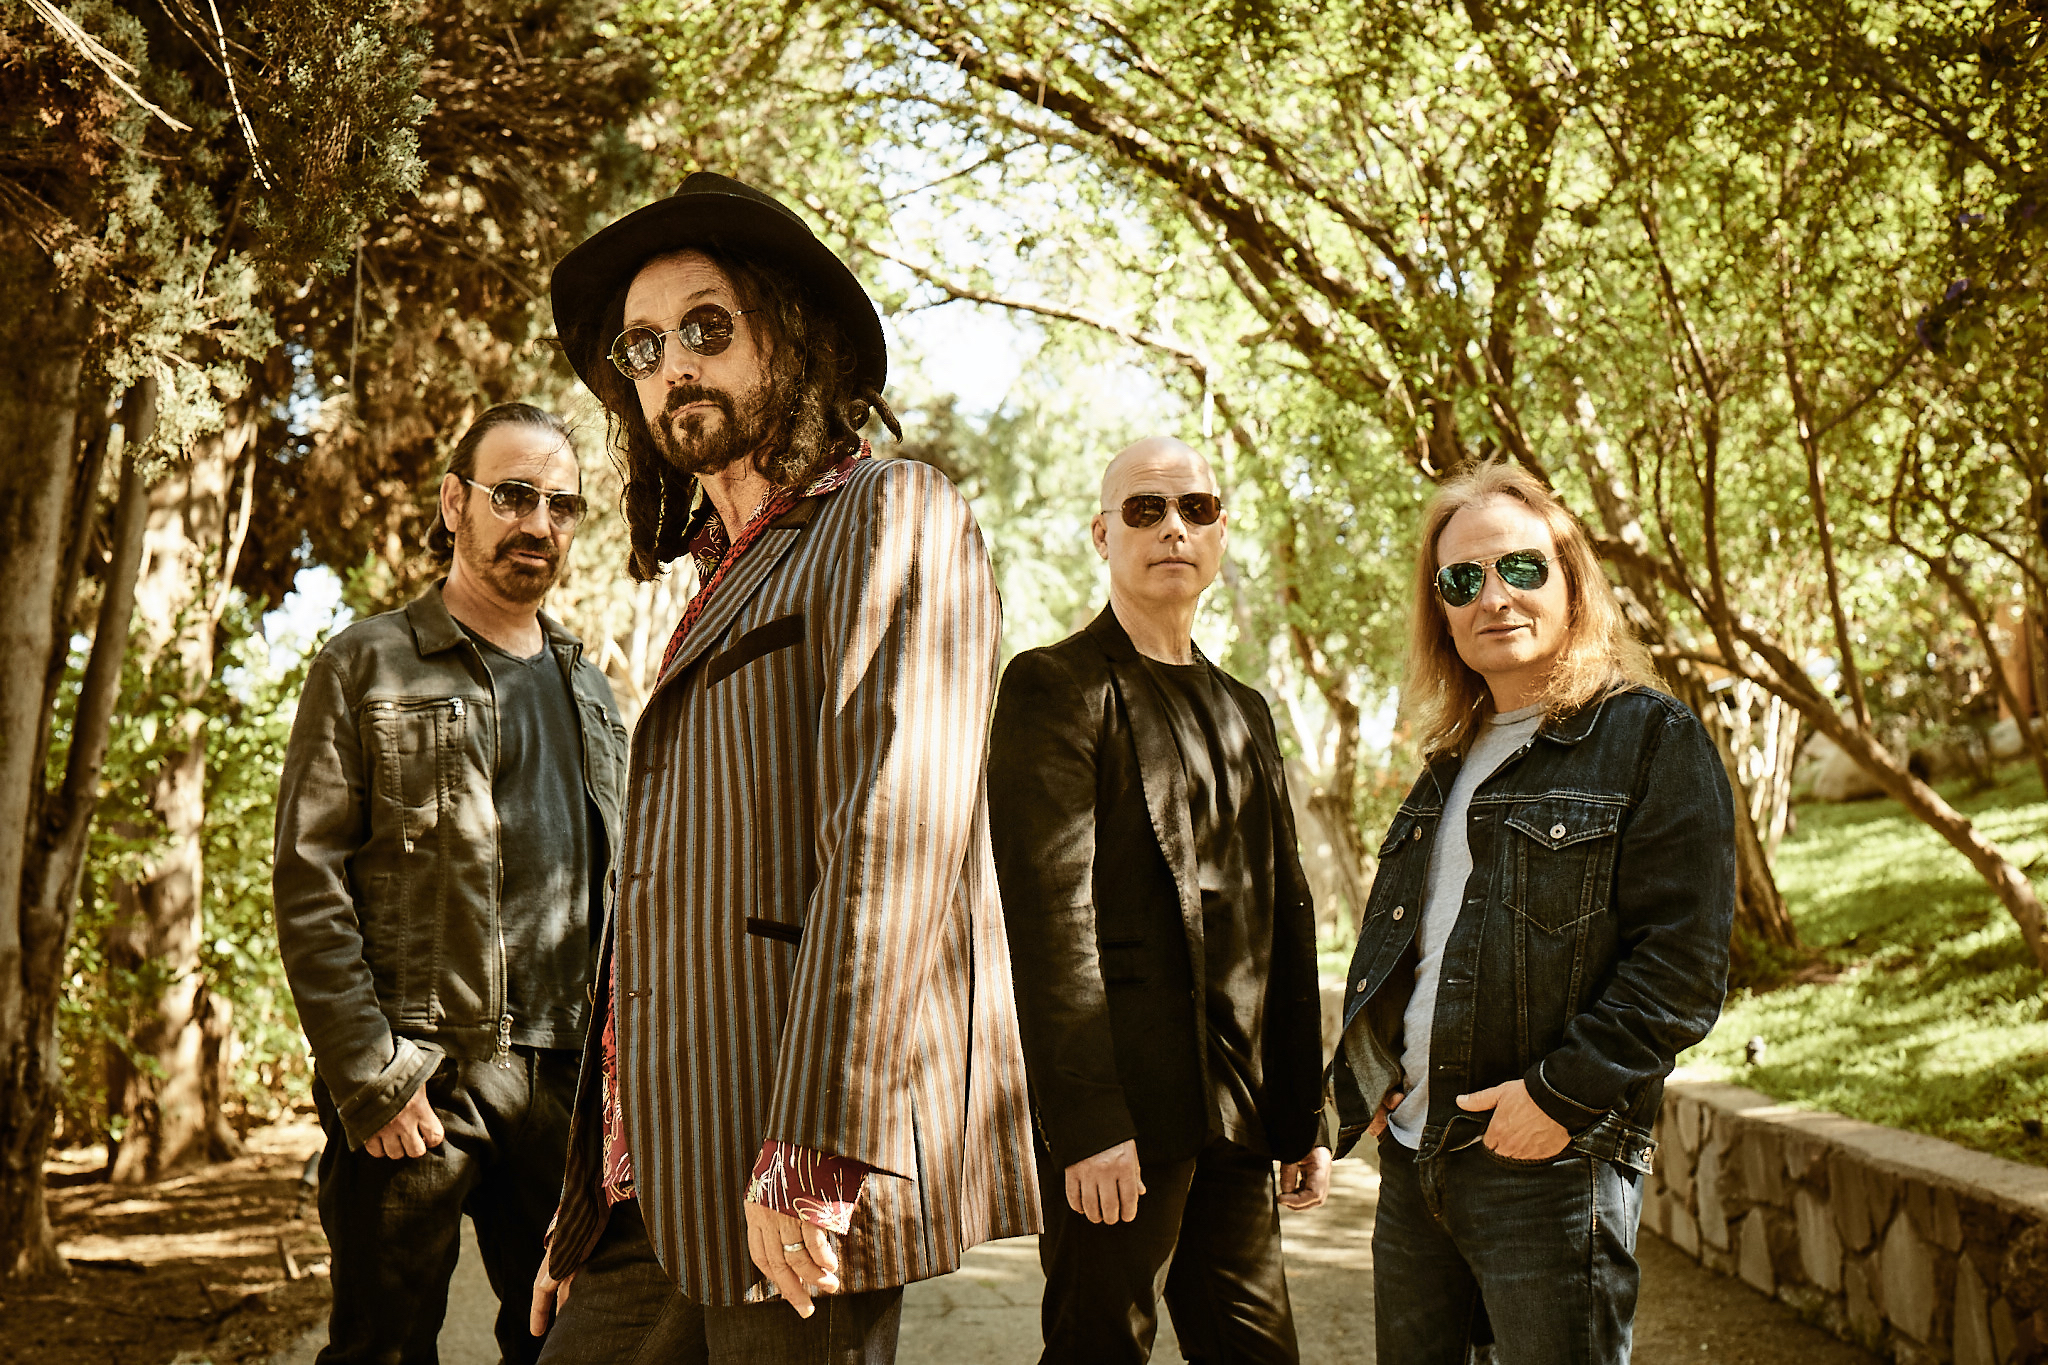 Track By Track: Mike Campbell on Tom Petty, Chris Stapleton and the Dirty Knobs’ ‘Wreckless Abandon’